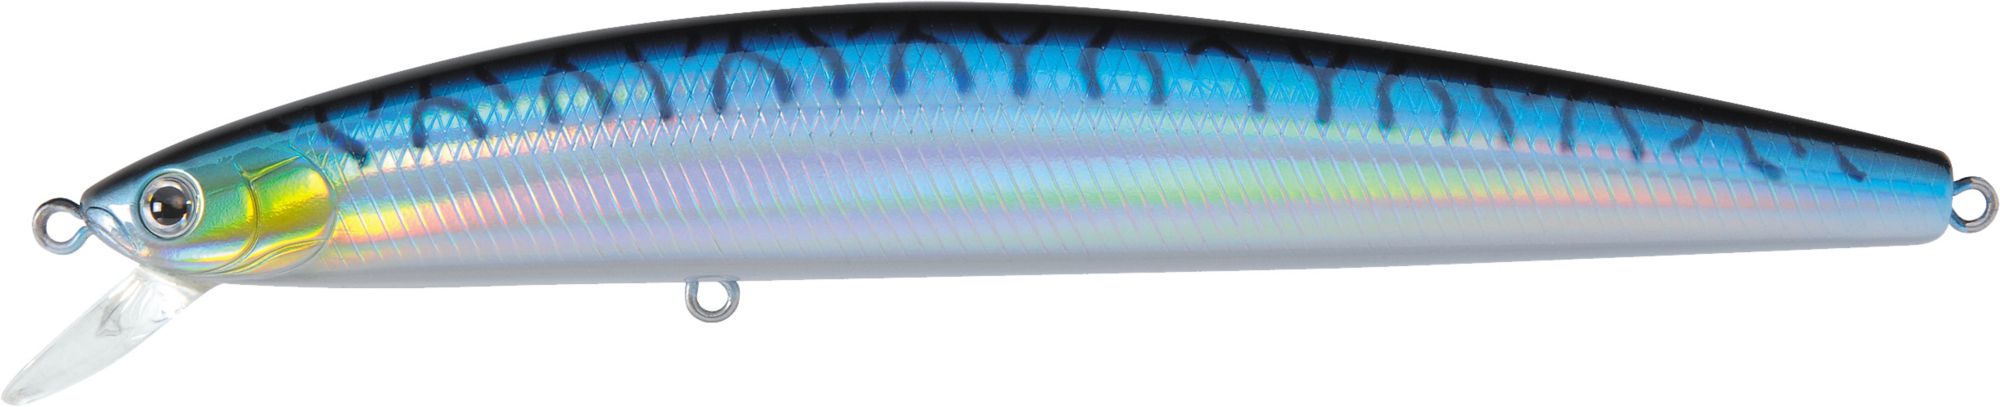 Rio Striped Bass Tapered Leader